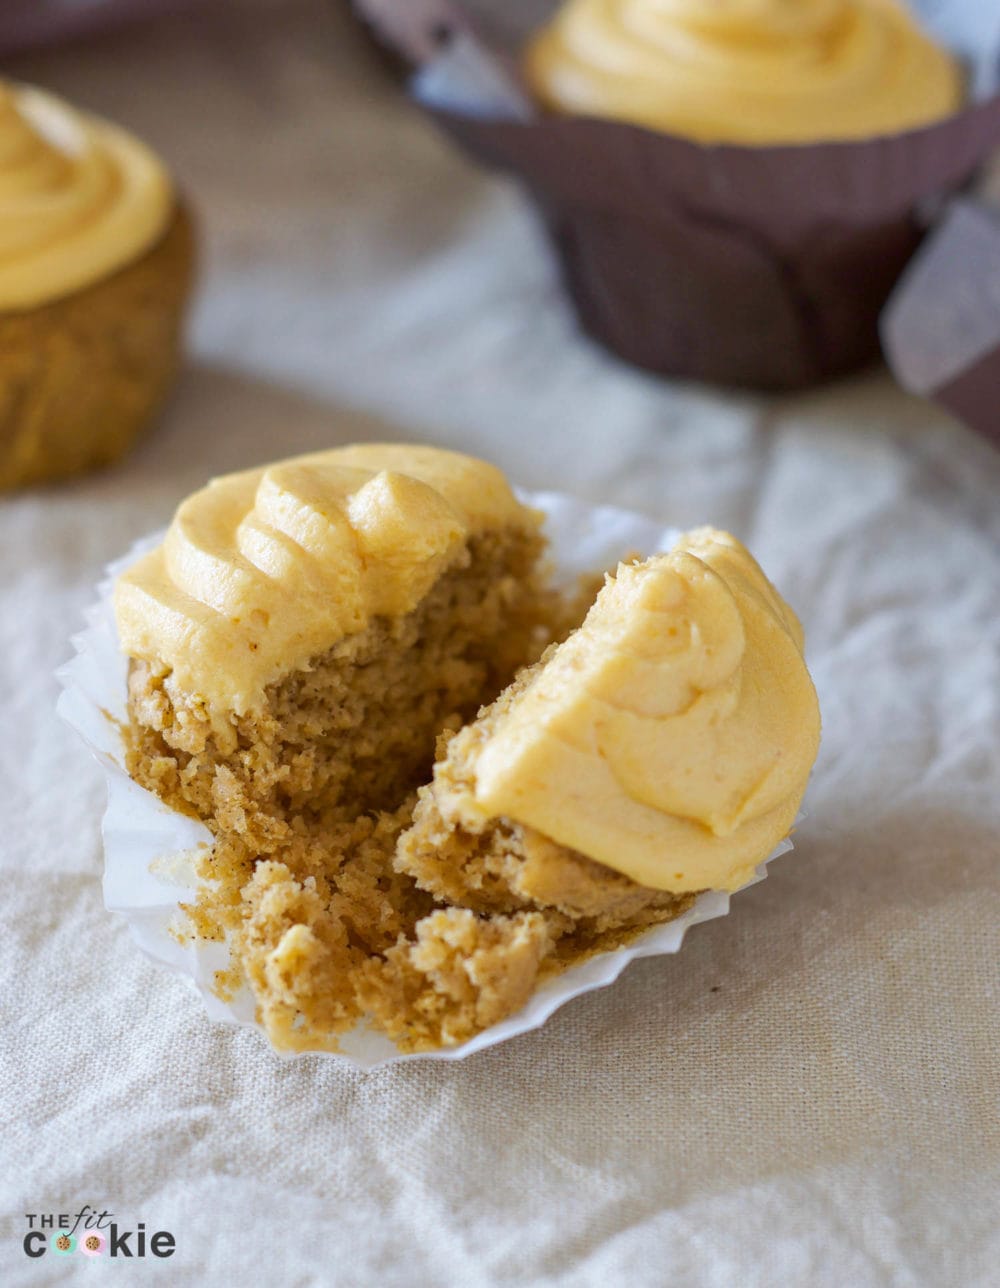 Celebrate fall with some pumpkin cupcakes! These Pumpkin Spice Cupcakes with Pumpkin Buttercream Frosting are gluten free, dairy free, vegan, and nut free. They are an easy and allergy friendly way to add pumpkin spice to your dessert menu - @TheFitCookie #glutenfree #dairyfree #vegan #pumpkin 